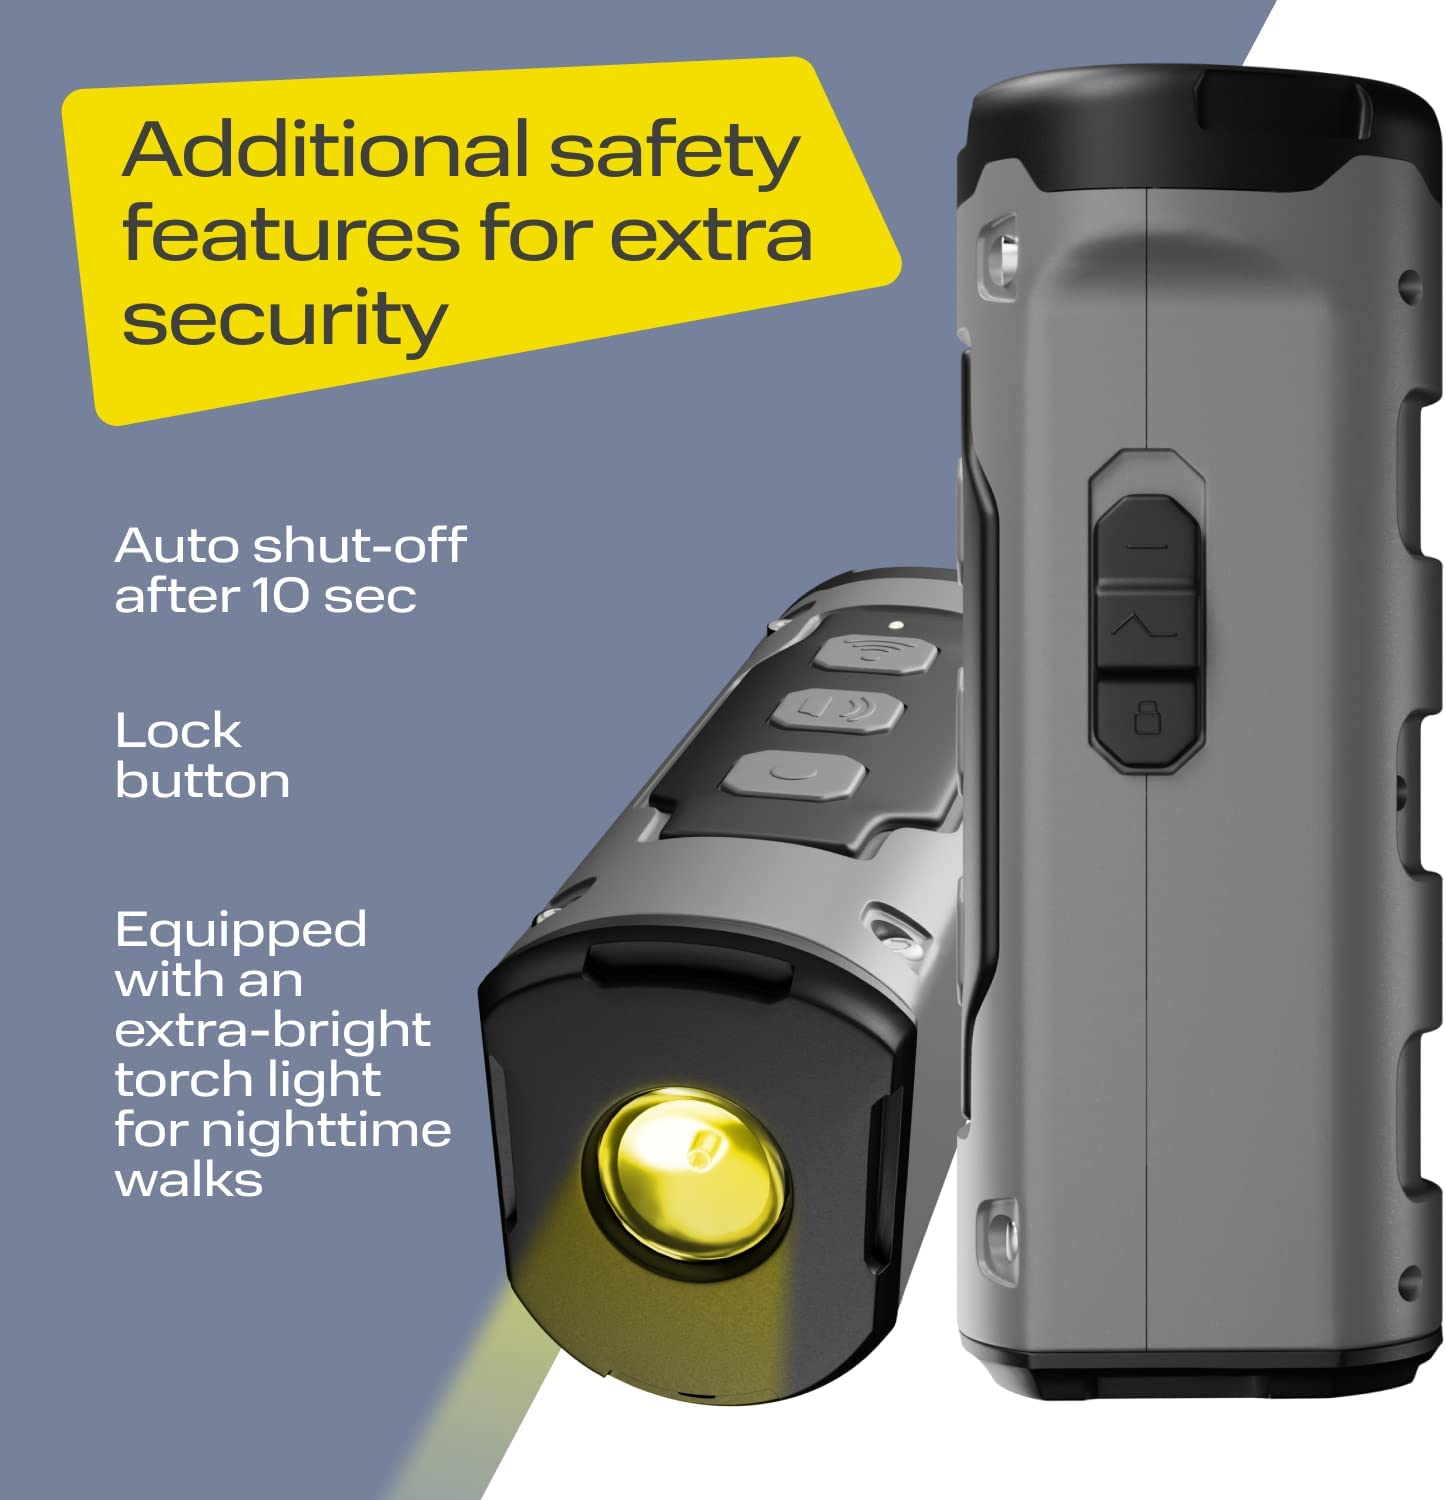 ultrasonic- additional safety features for extra security auto shut-off after 10 sec lock button equipped with an extra-bright torch light for nighttime walks